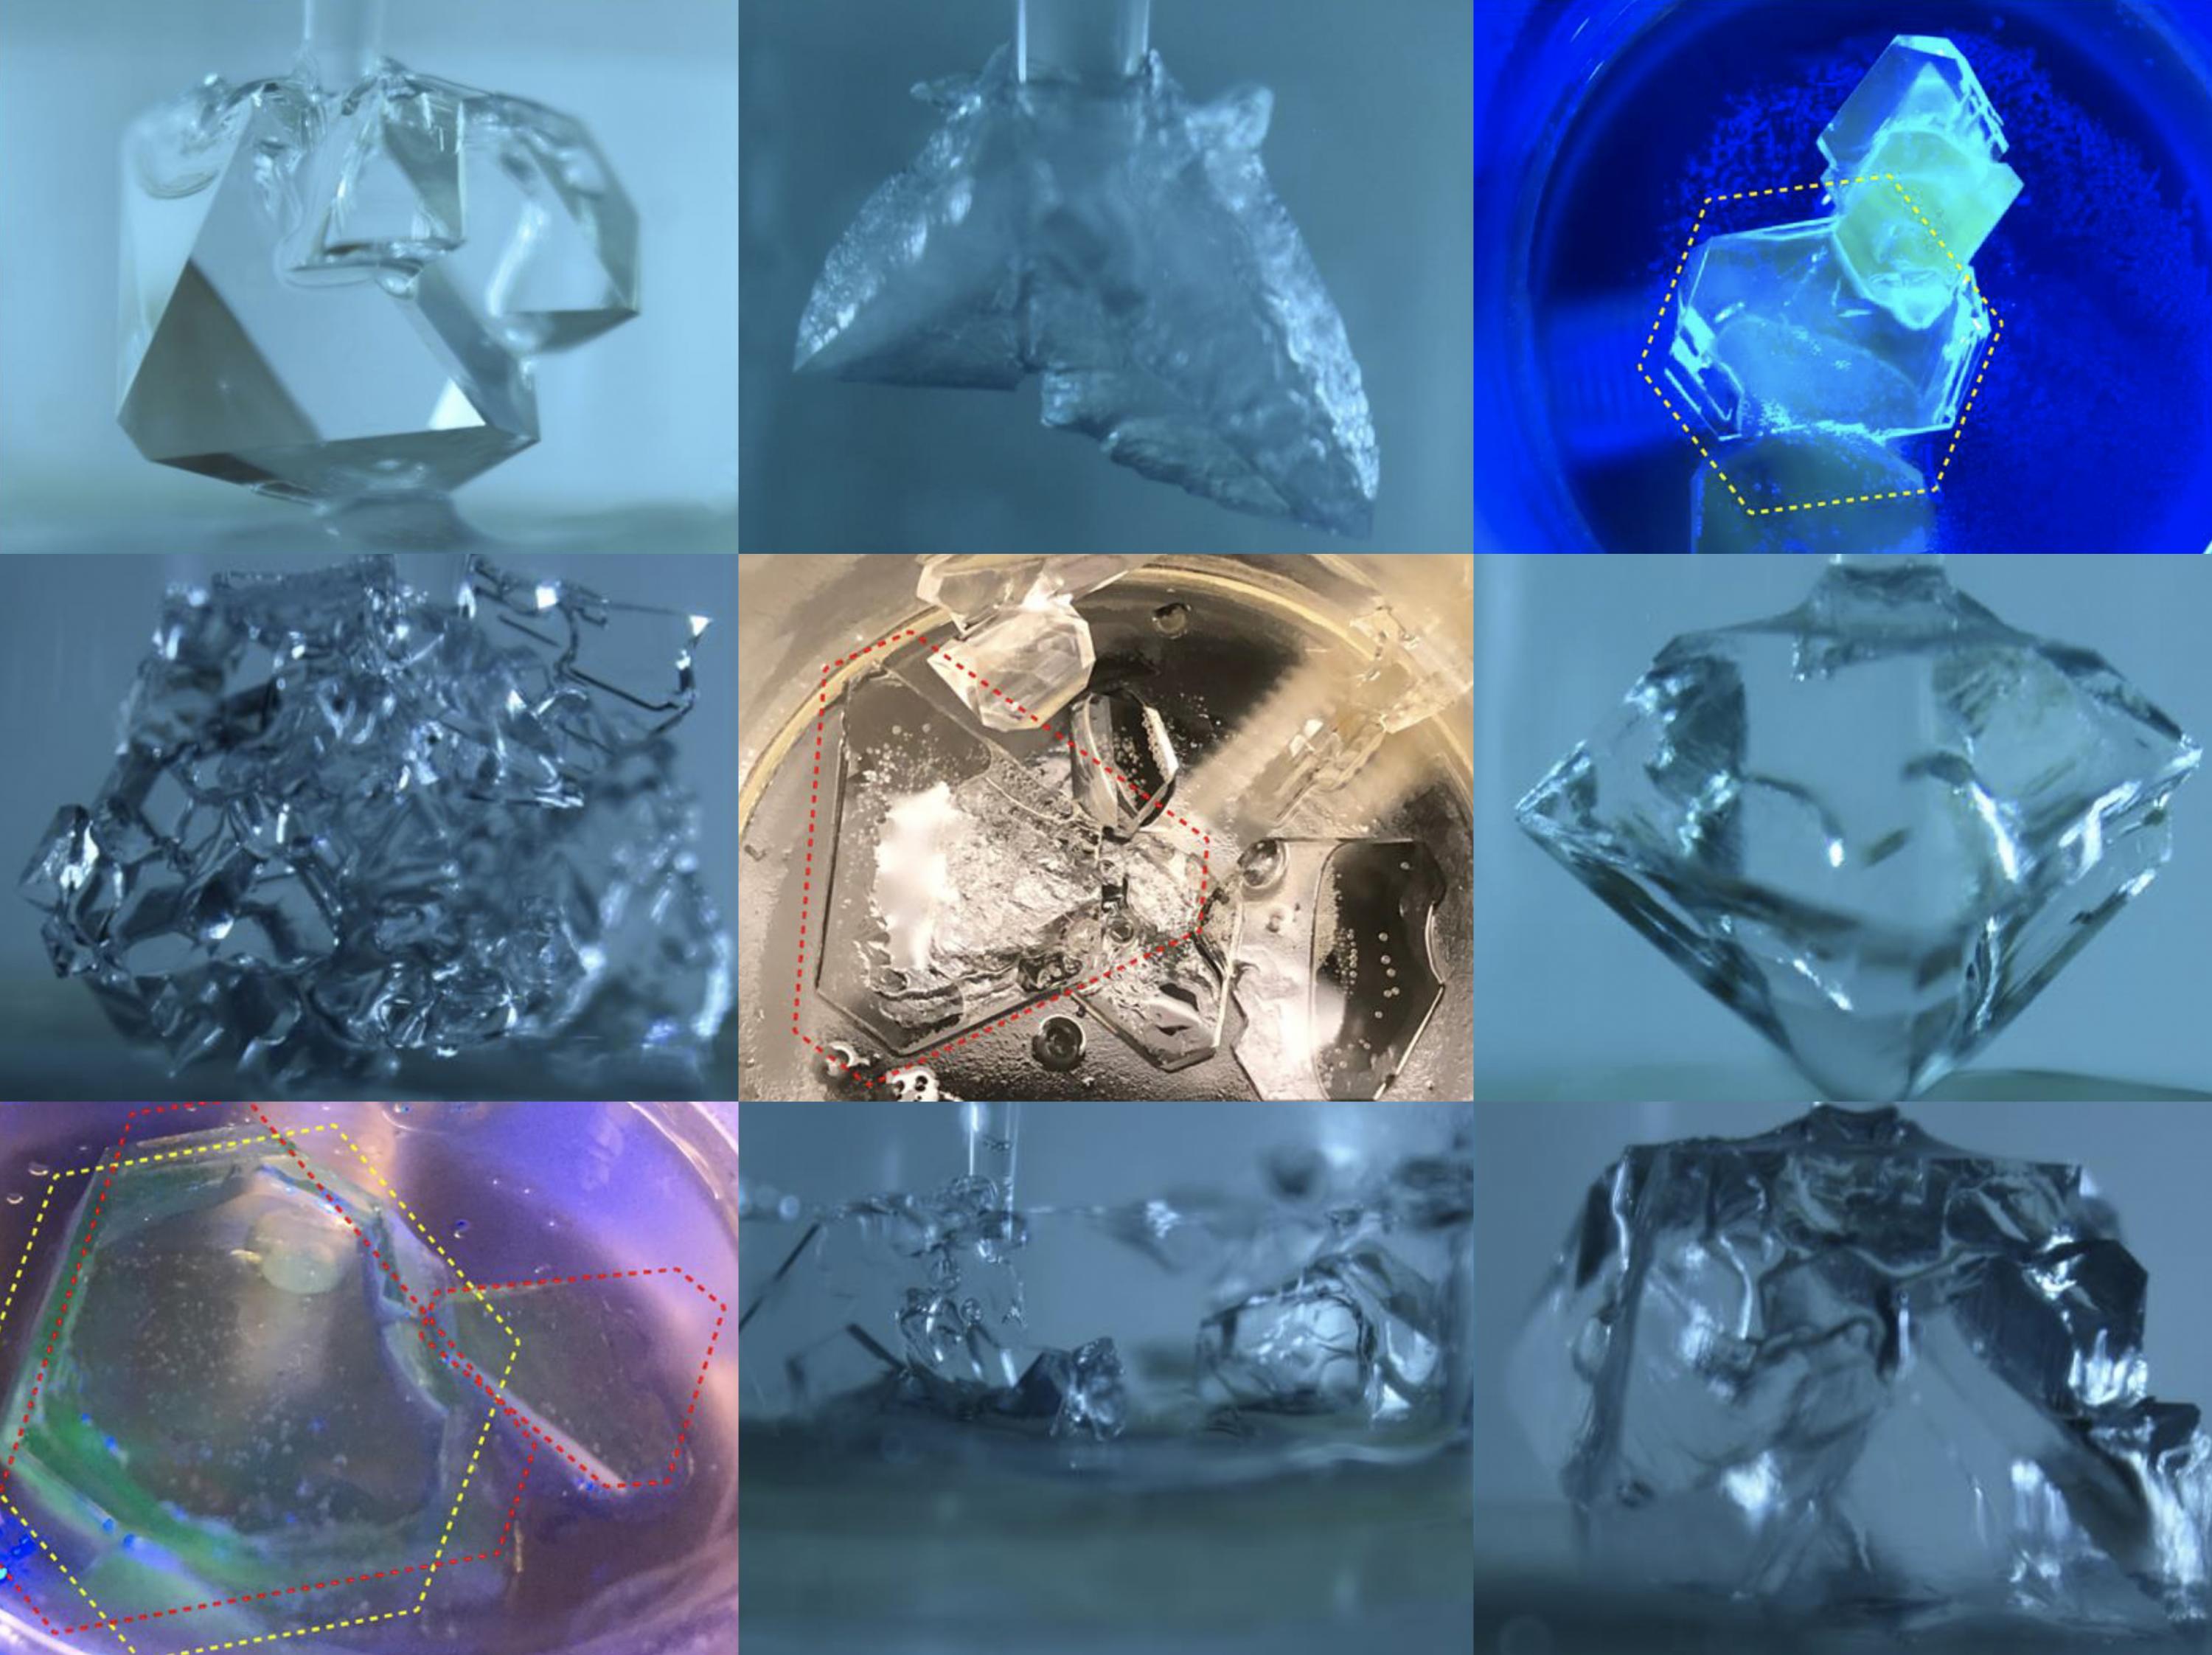 Clathrate crystals in various stages of growth, along with control treatments (top left, top middle samples).